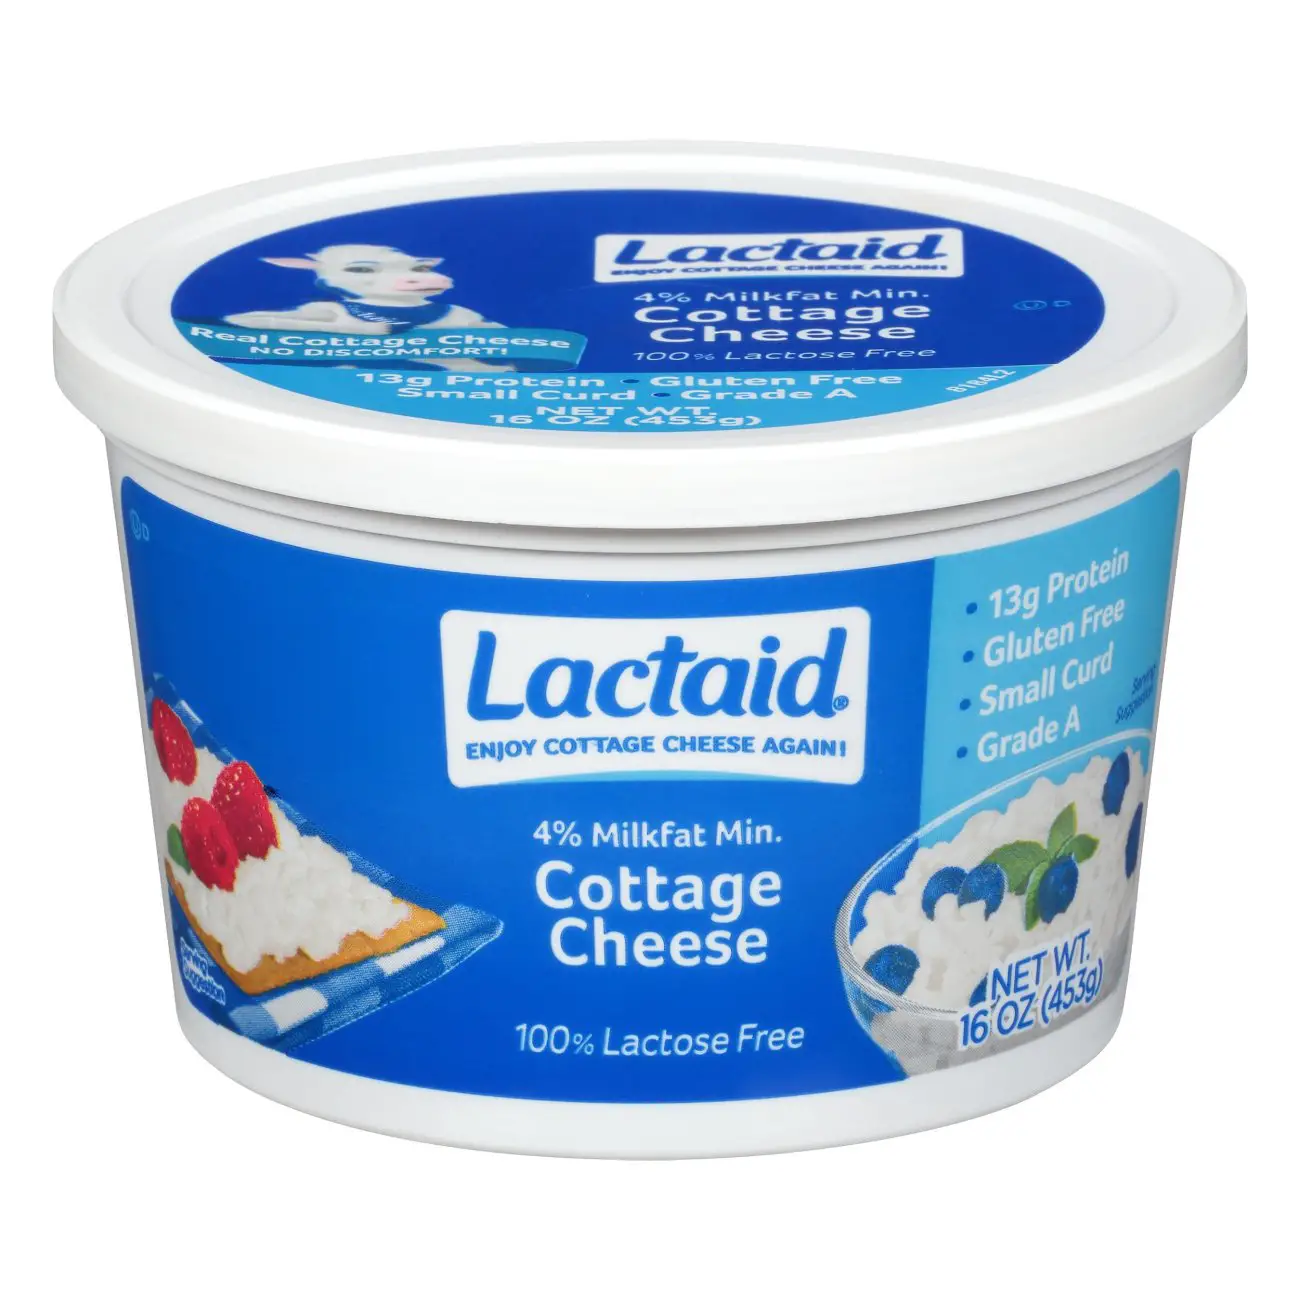 Lactaid 4% Milk Fat Cottage Cheese